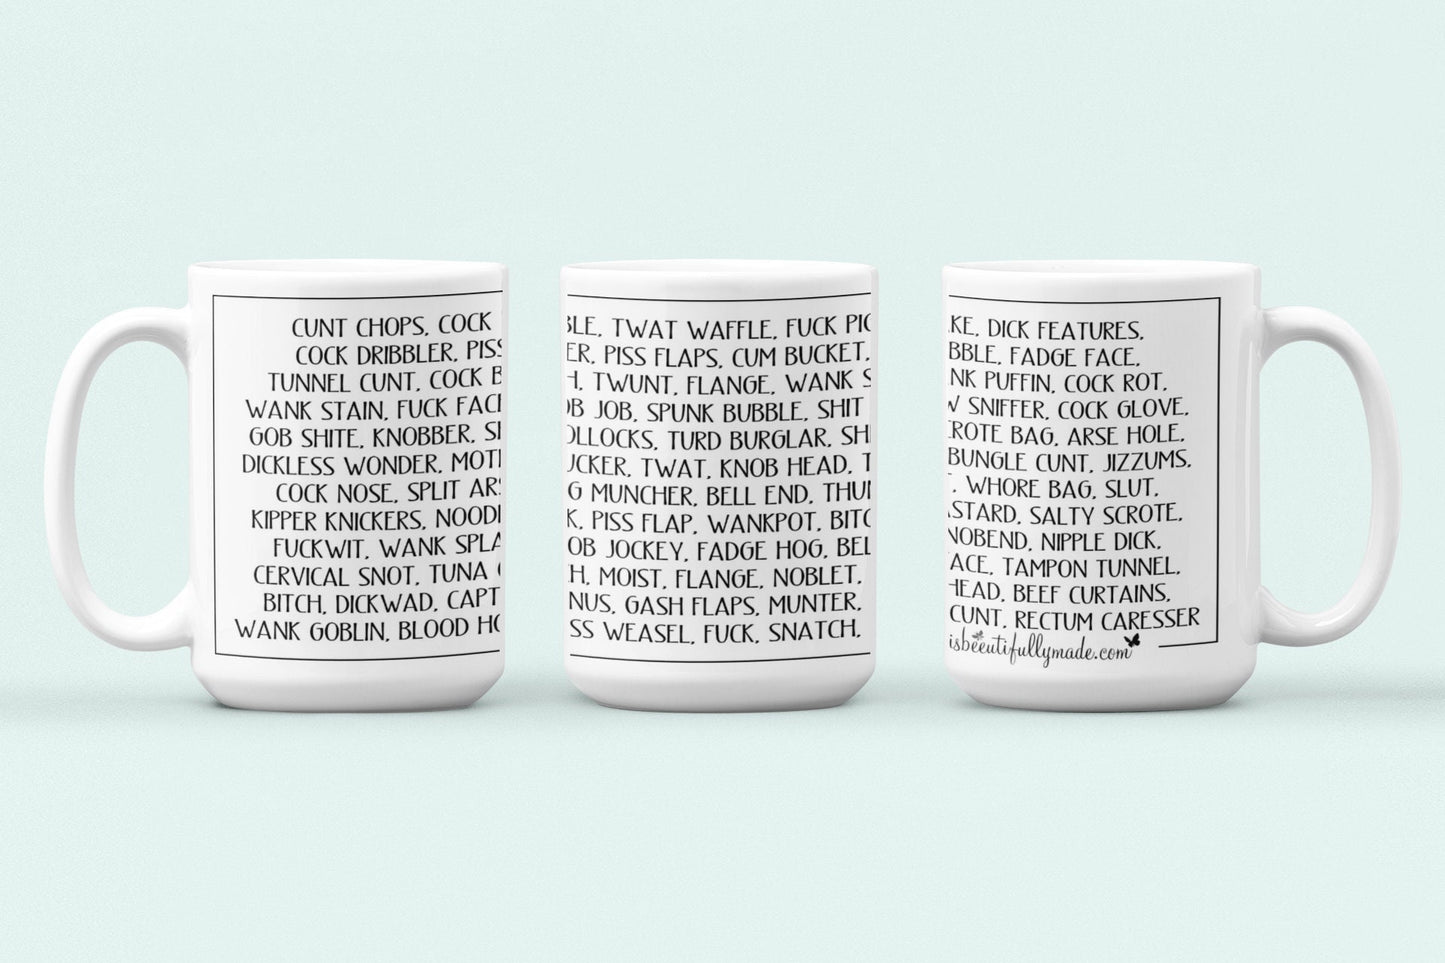 A white ceramic mug featuring a full wrap design with funny words printed throughout. The words include c*nt chops, twat waffle, cock womble, piss flaps, etc. Printed in black ink.